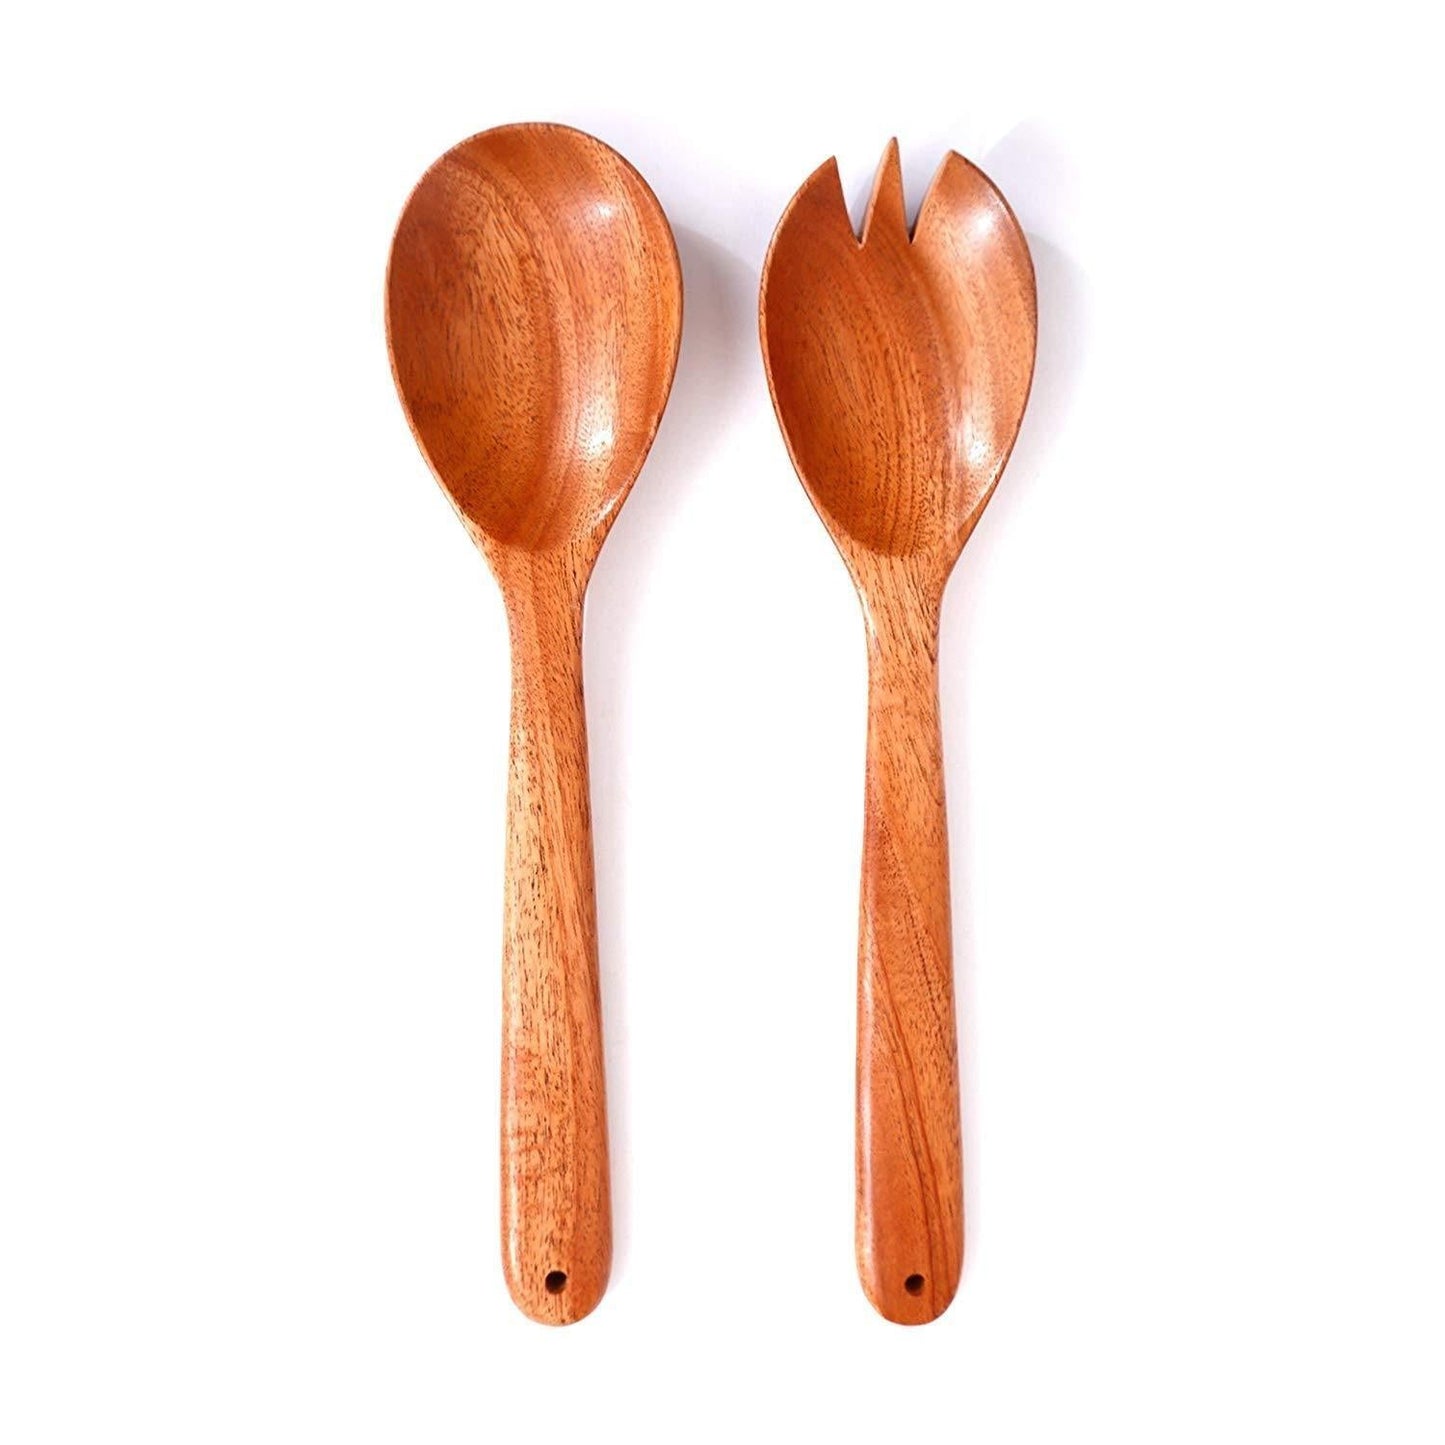 Neem Wood Salad Spoon Set of 2 | durable & Scratch free | The Indus Valley